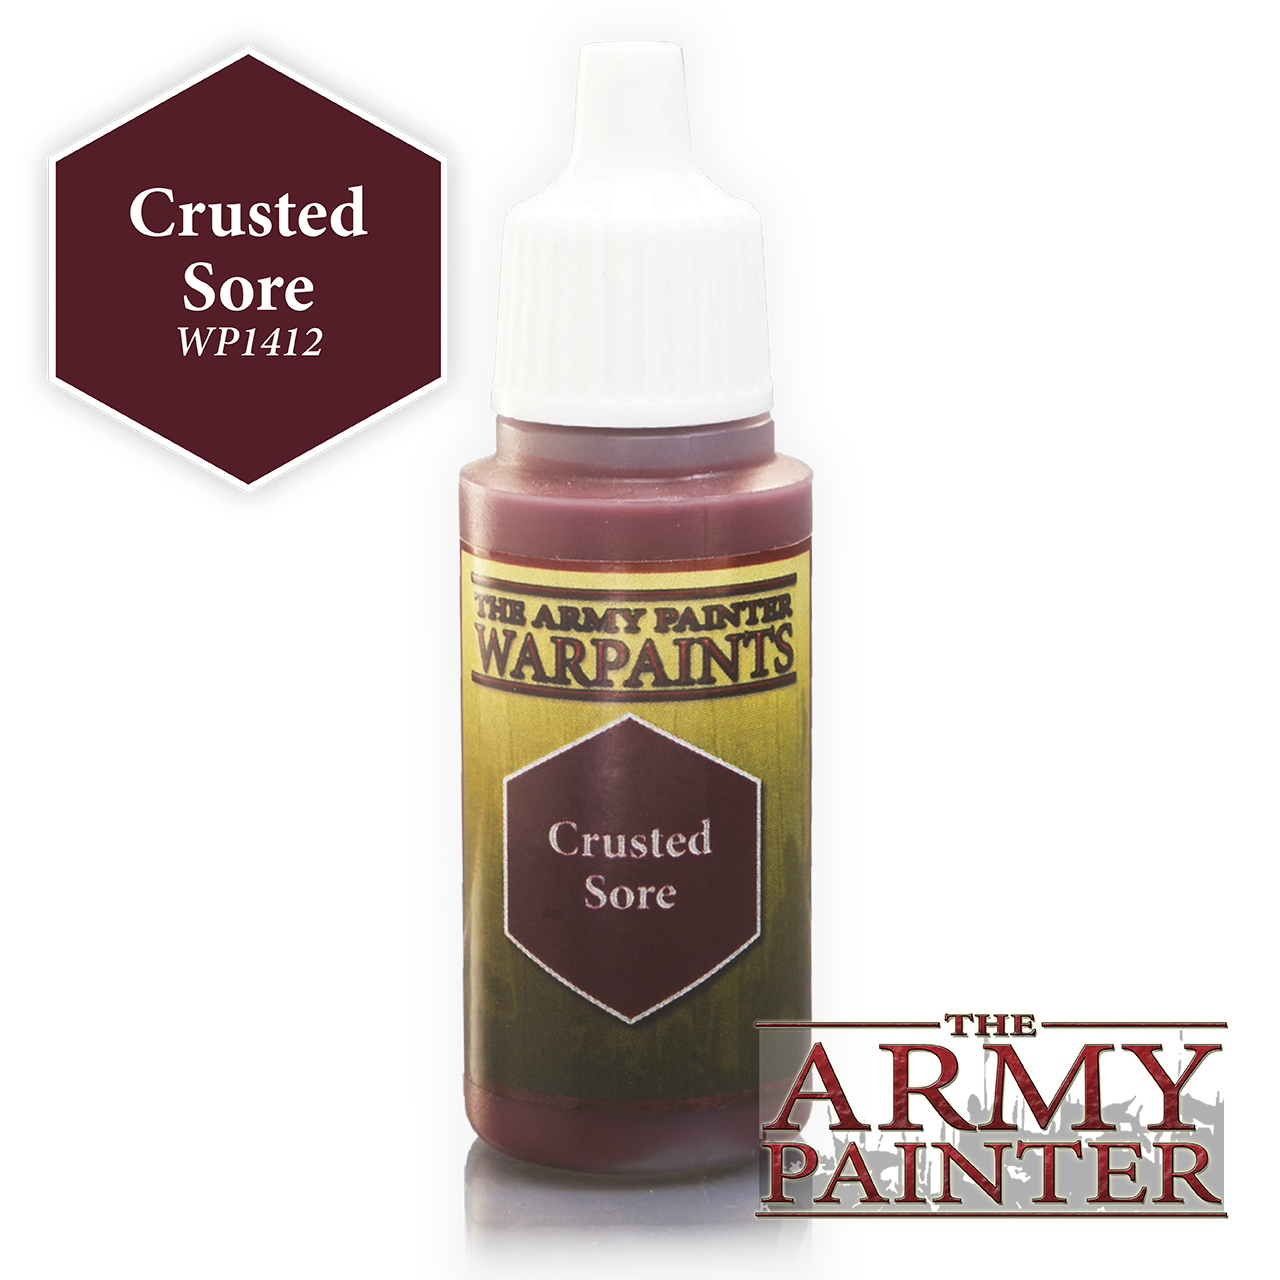 The Army Painter Warpaints: Crusted Sore (18ml)